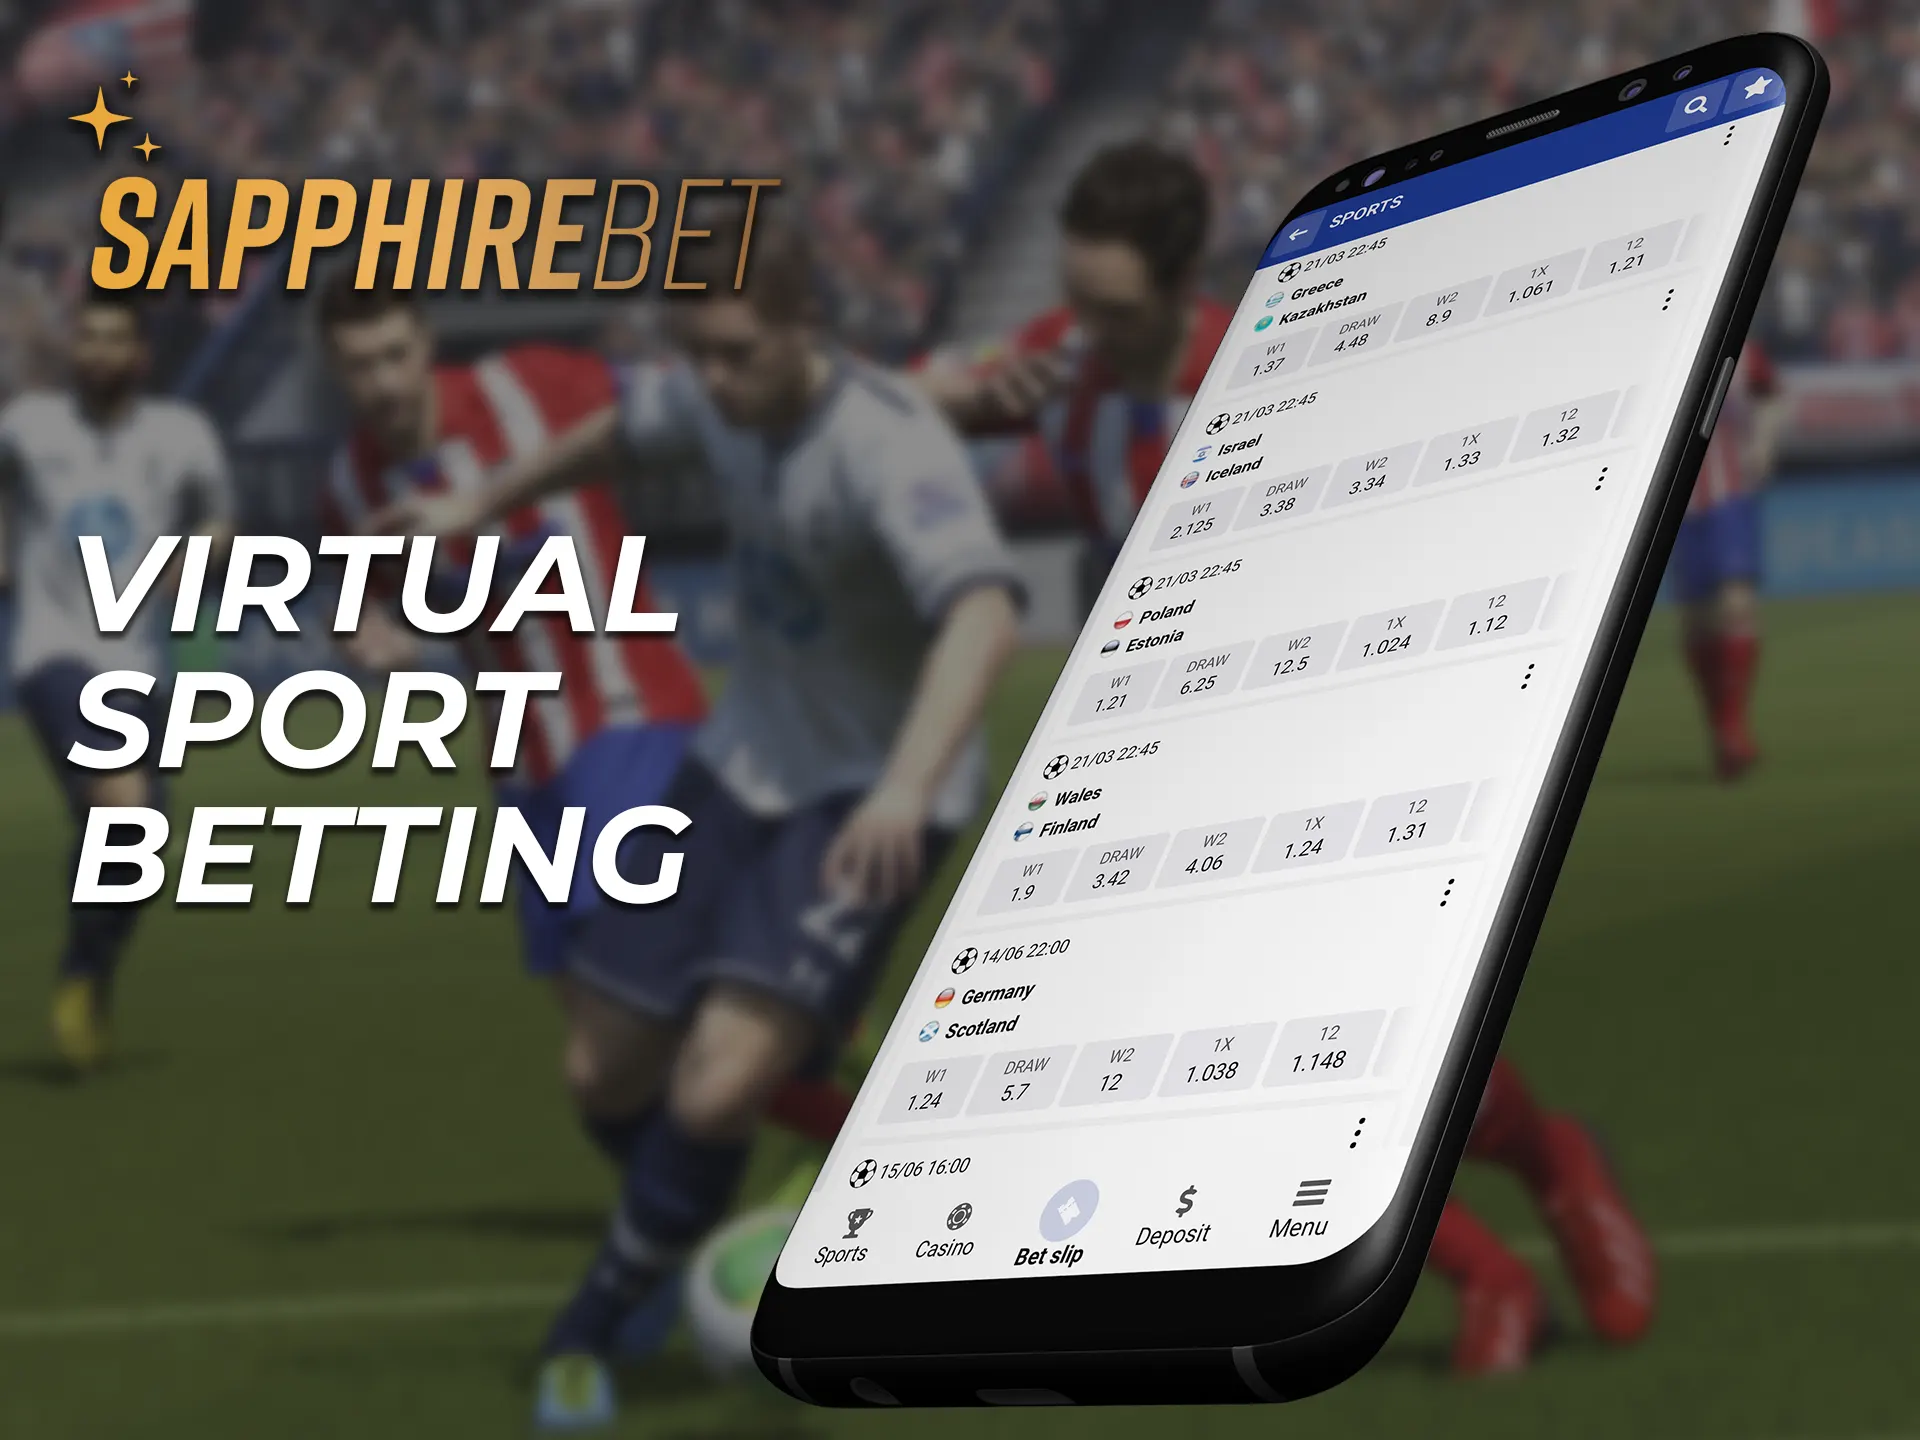 In the SapphireBet app, you can bet on virtual sports.